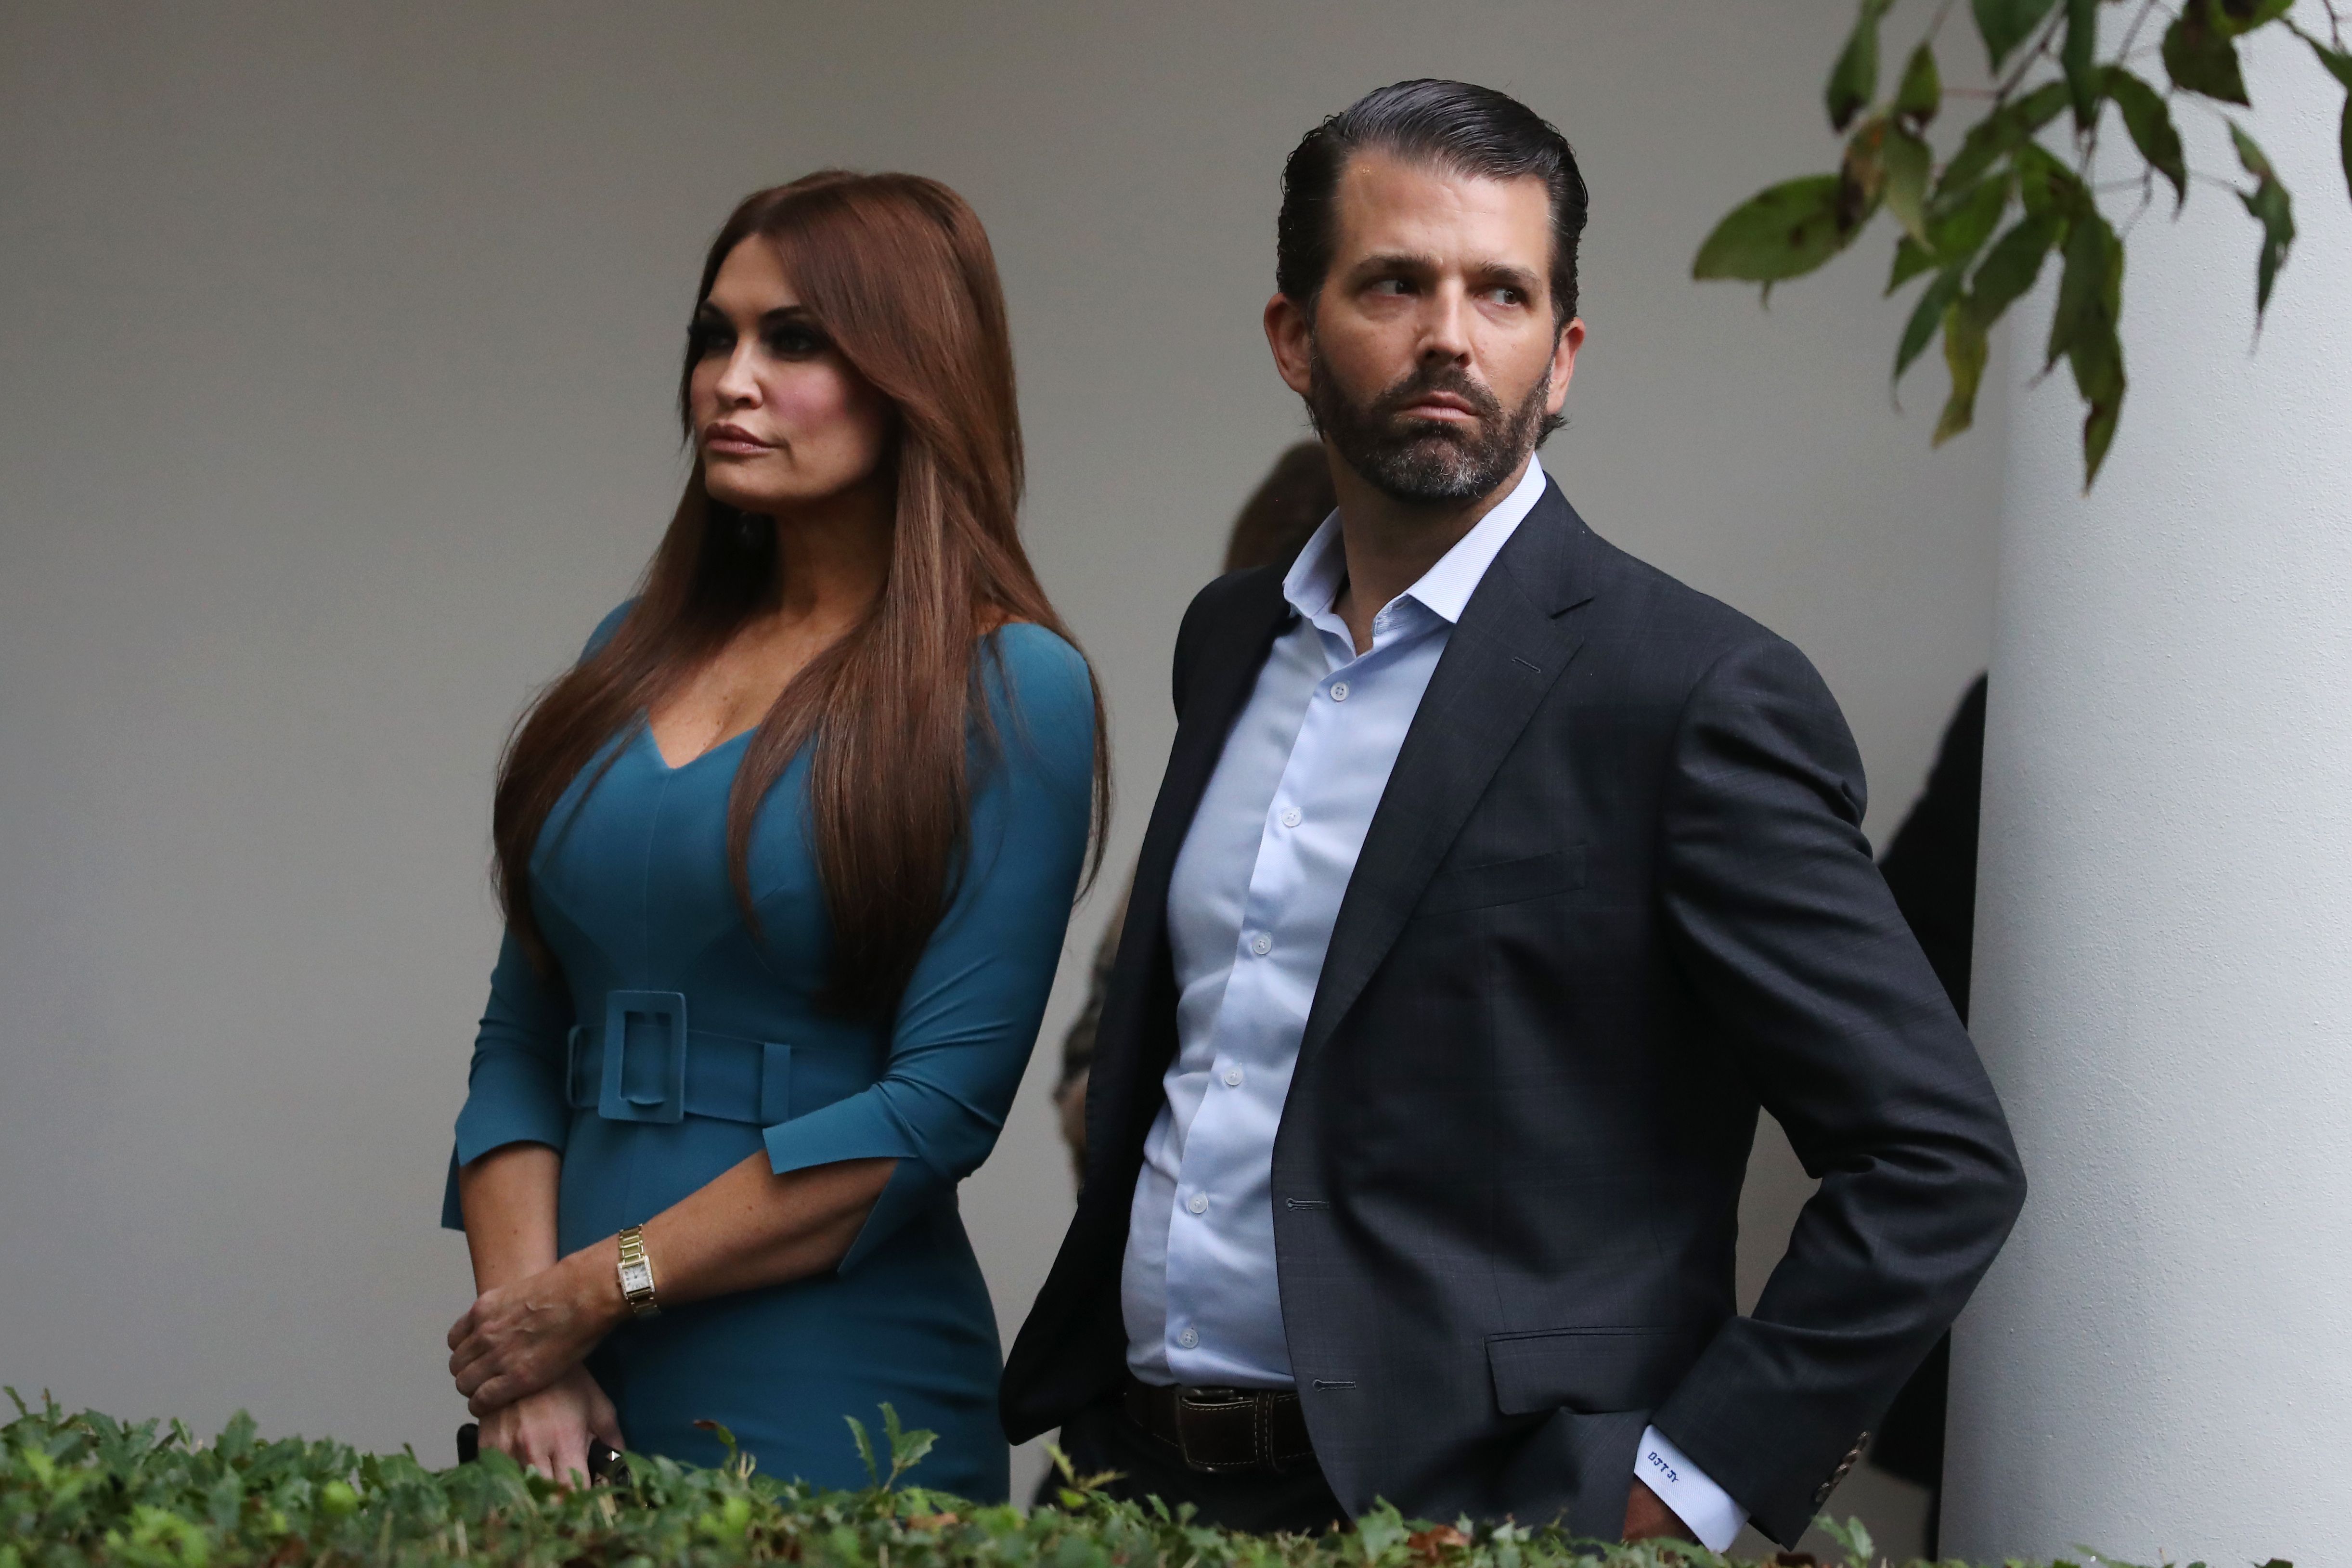 Kimberly Guilfoyle and Donald Trump Jr arriving to a press conference on the census by President Trump in the Rose Garden of the White House in Washington D.C. | Photo: Mark Wilson/Getty Images